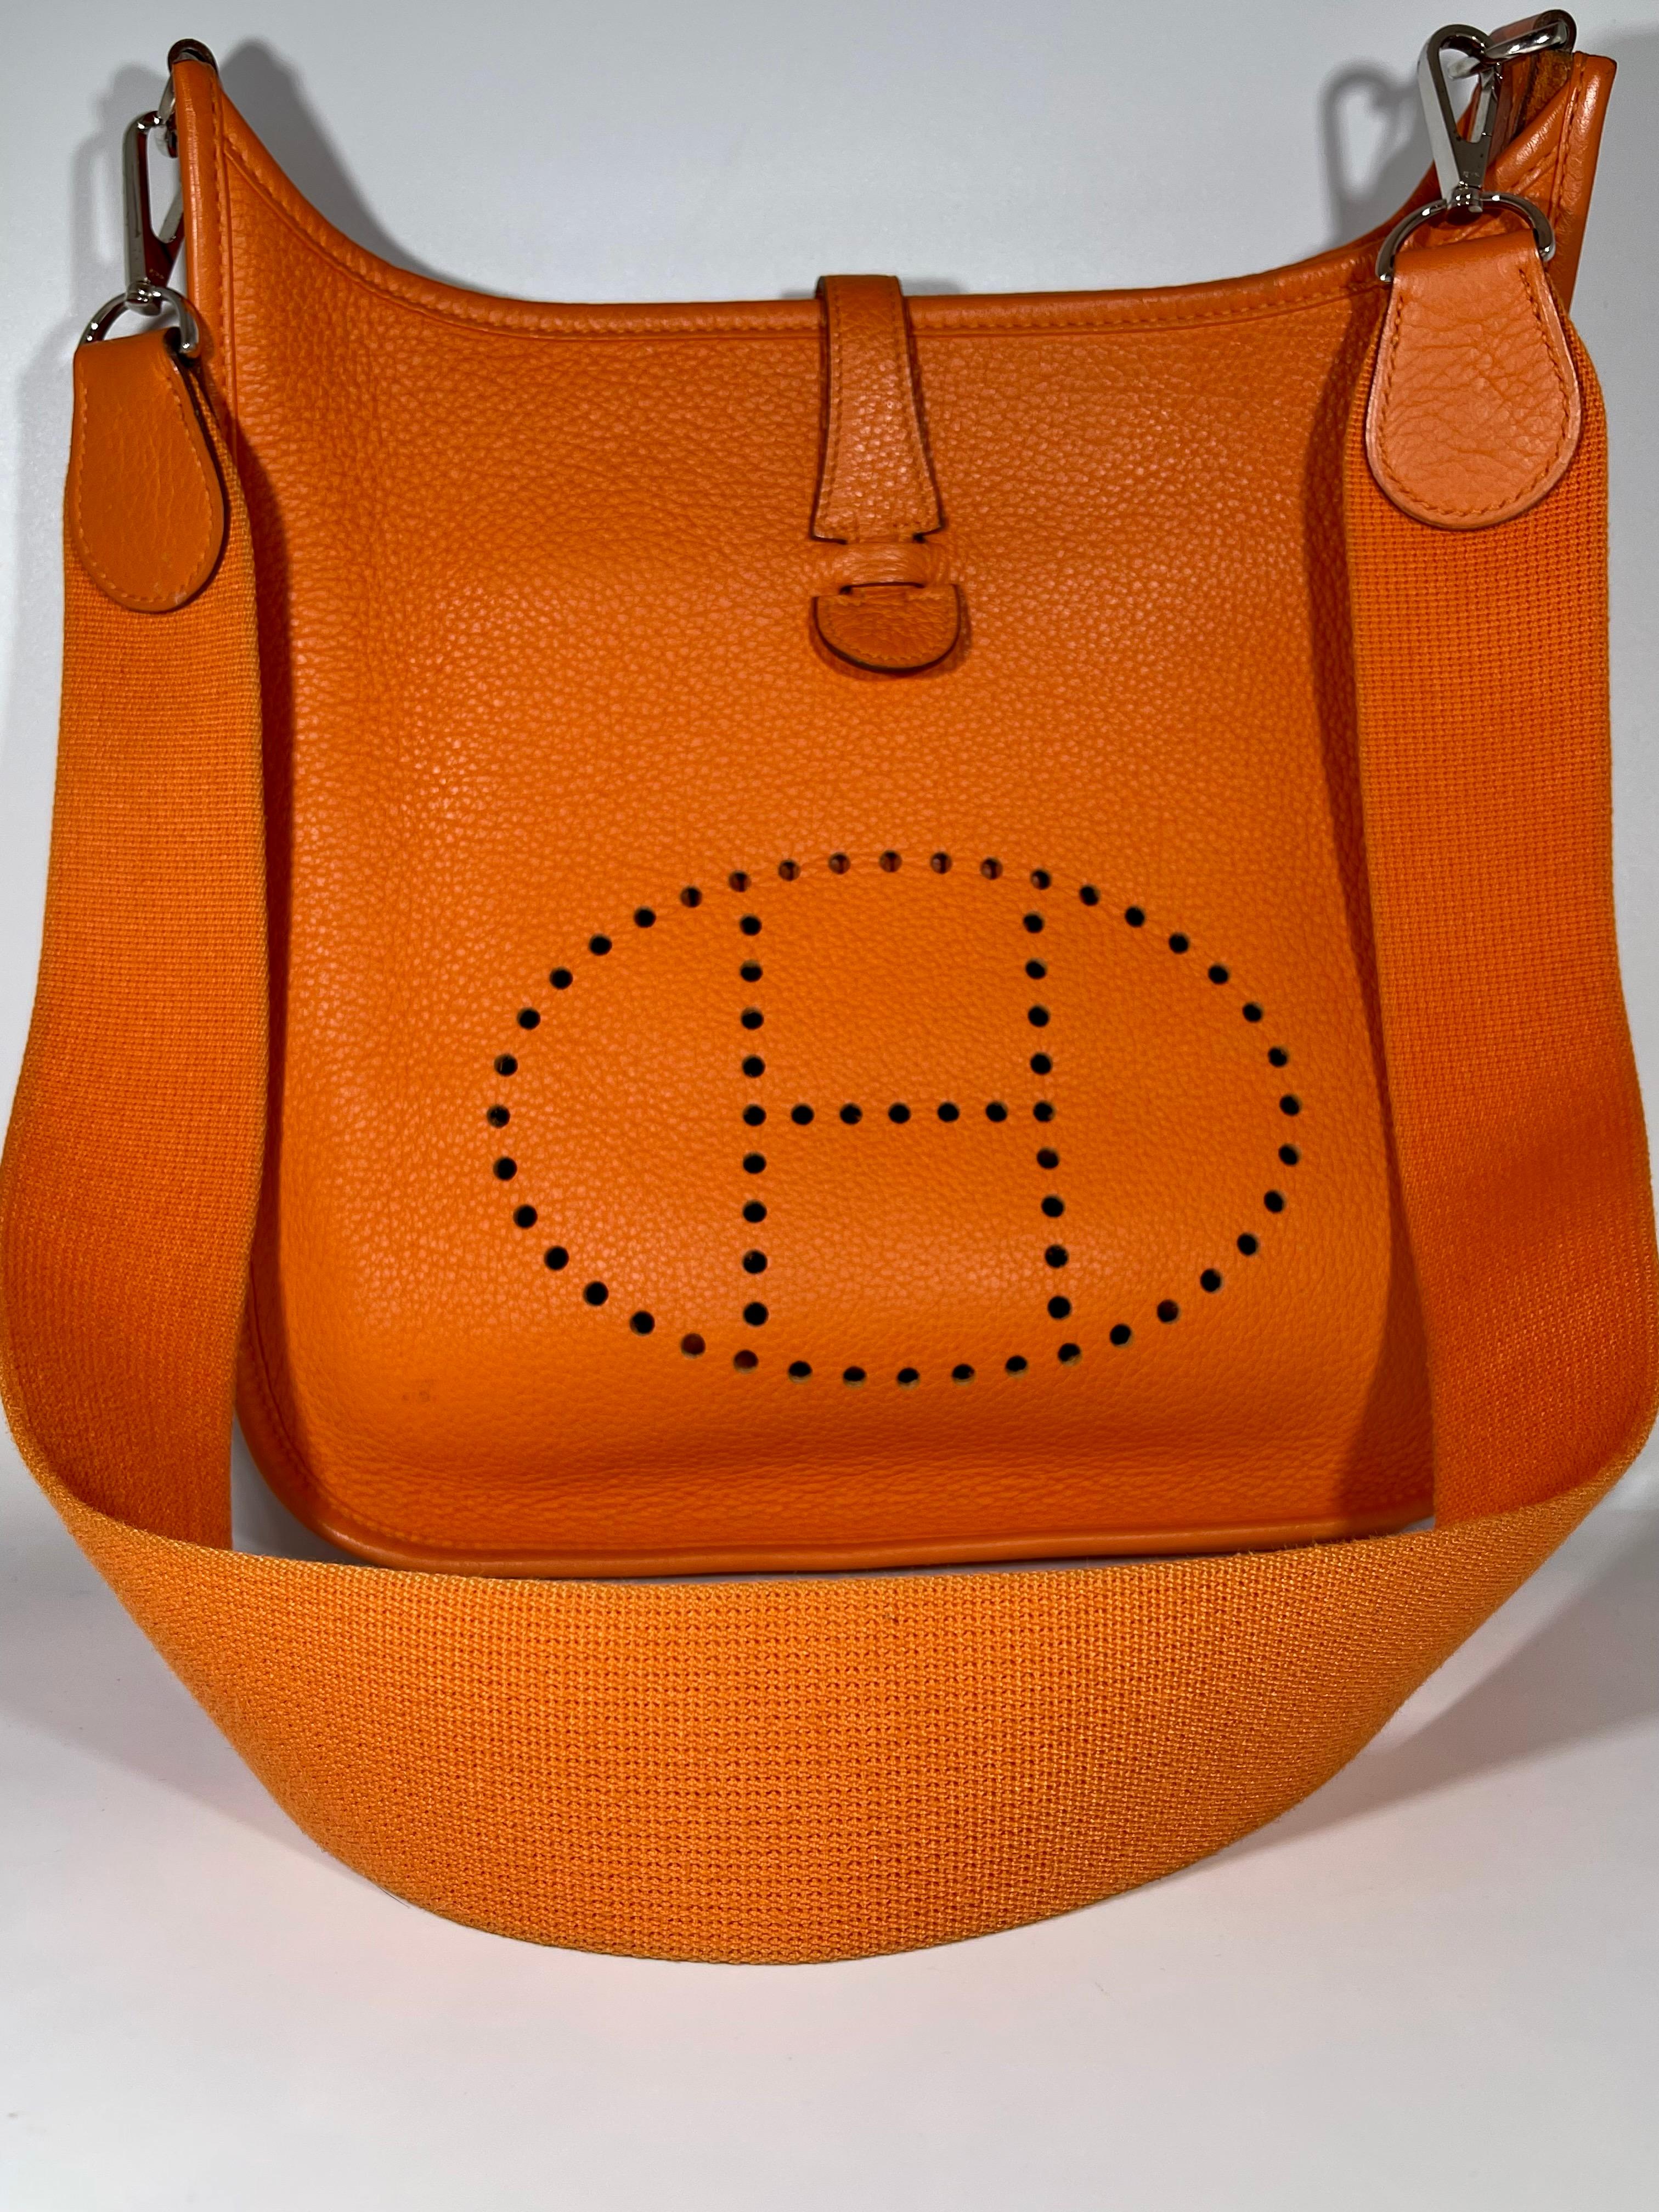 Hermès Evelyne Pm Oranges Leather Cross Body Bag 
Cross-Body  orange  Leather Messenger Bag 
Most desirable and Convenient cross body bag and most desirable color Orange
 Measurements: Height 11